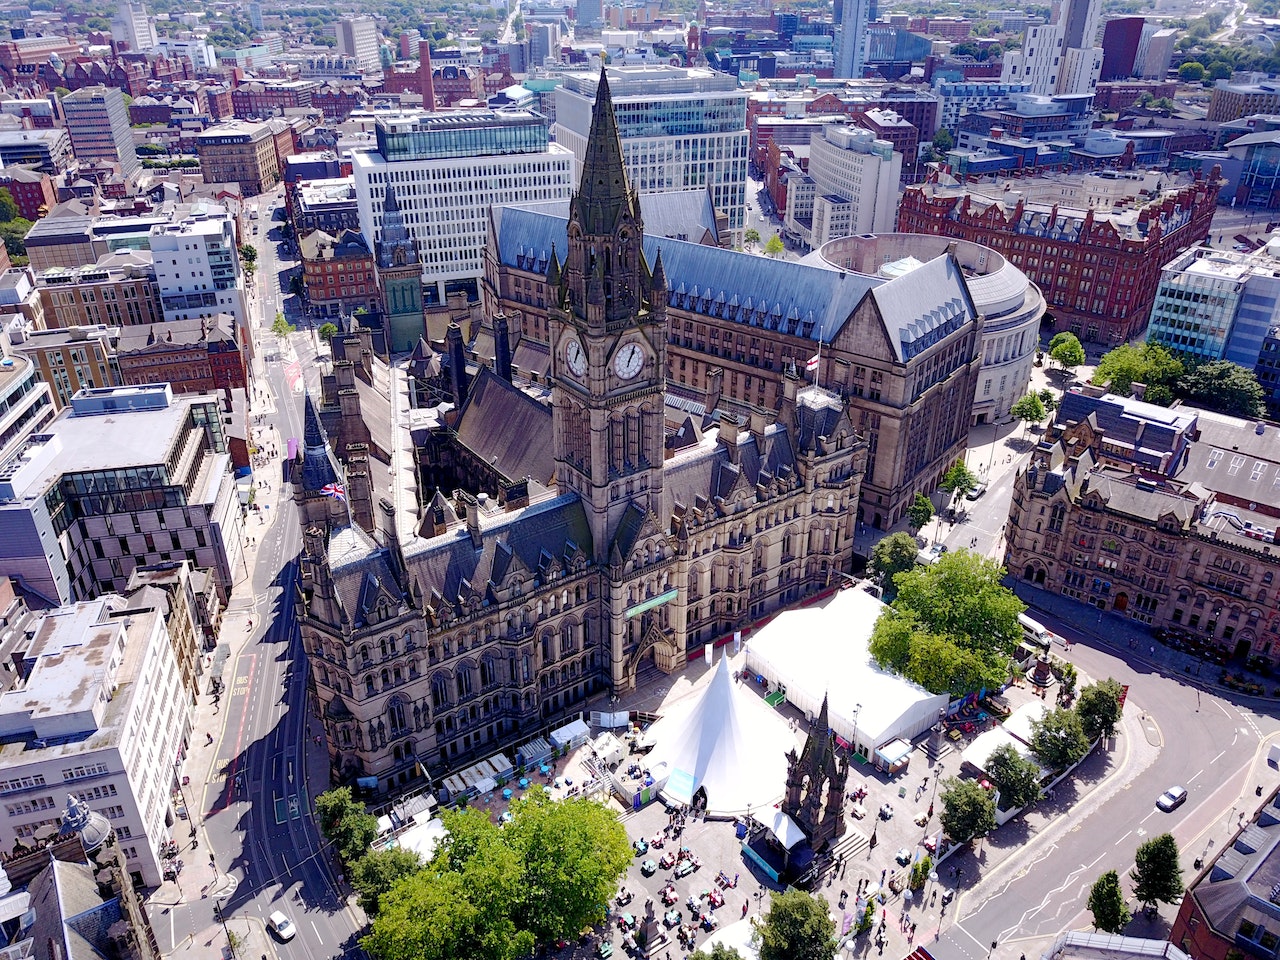 Manchester: The Birthplace of the Industrial Revolution